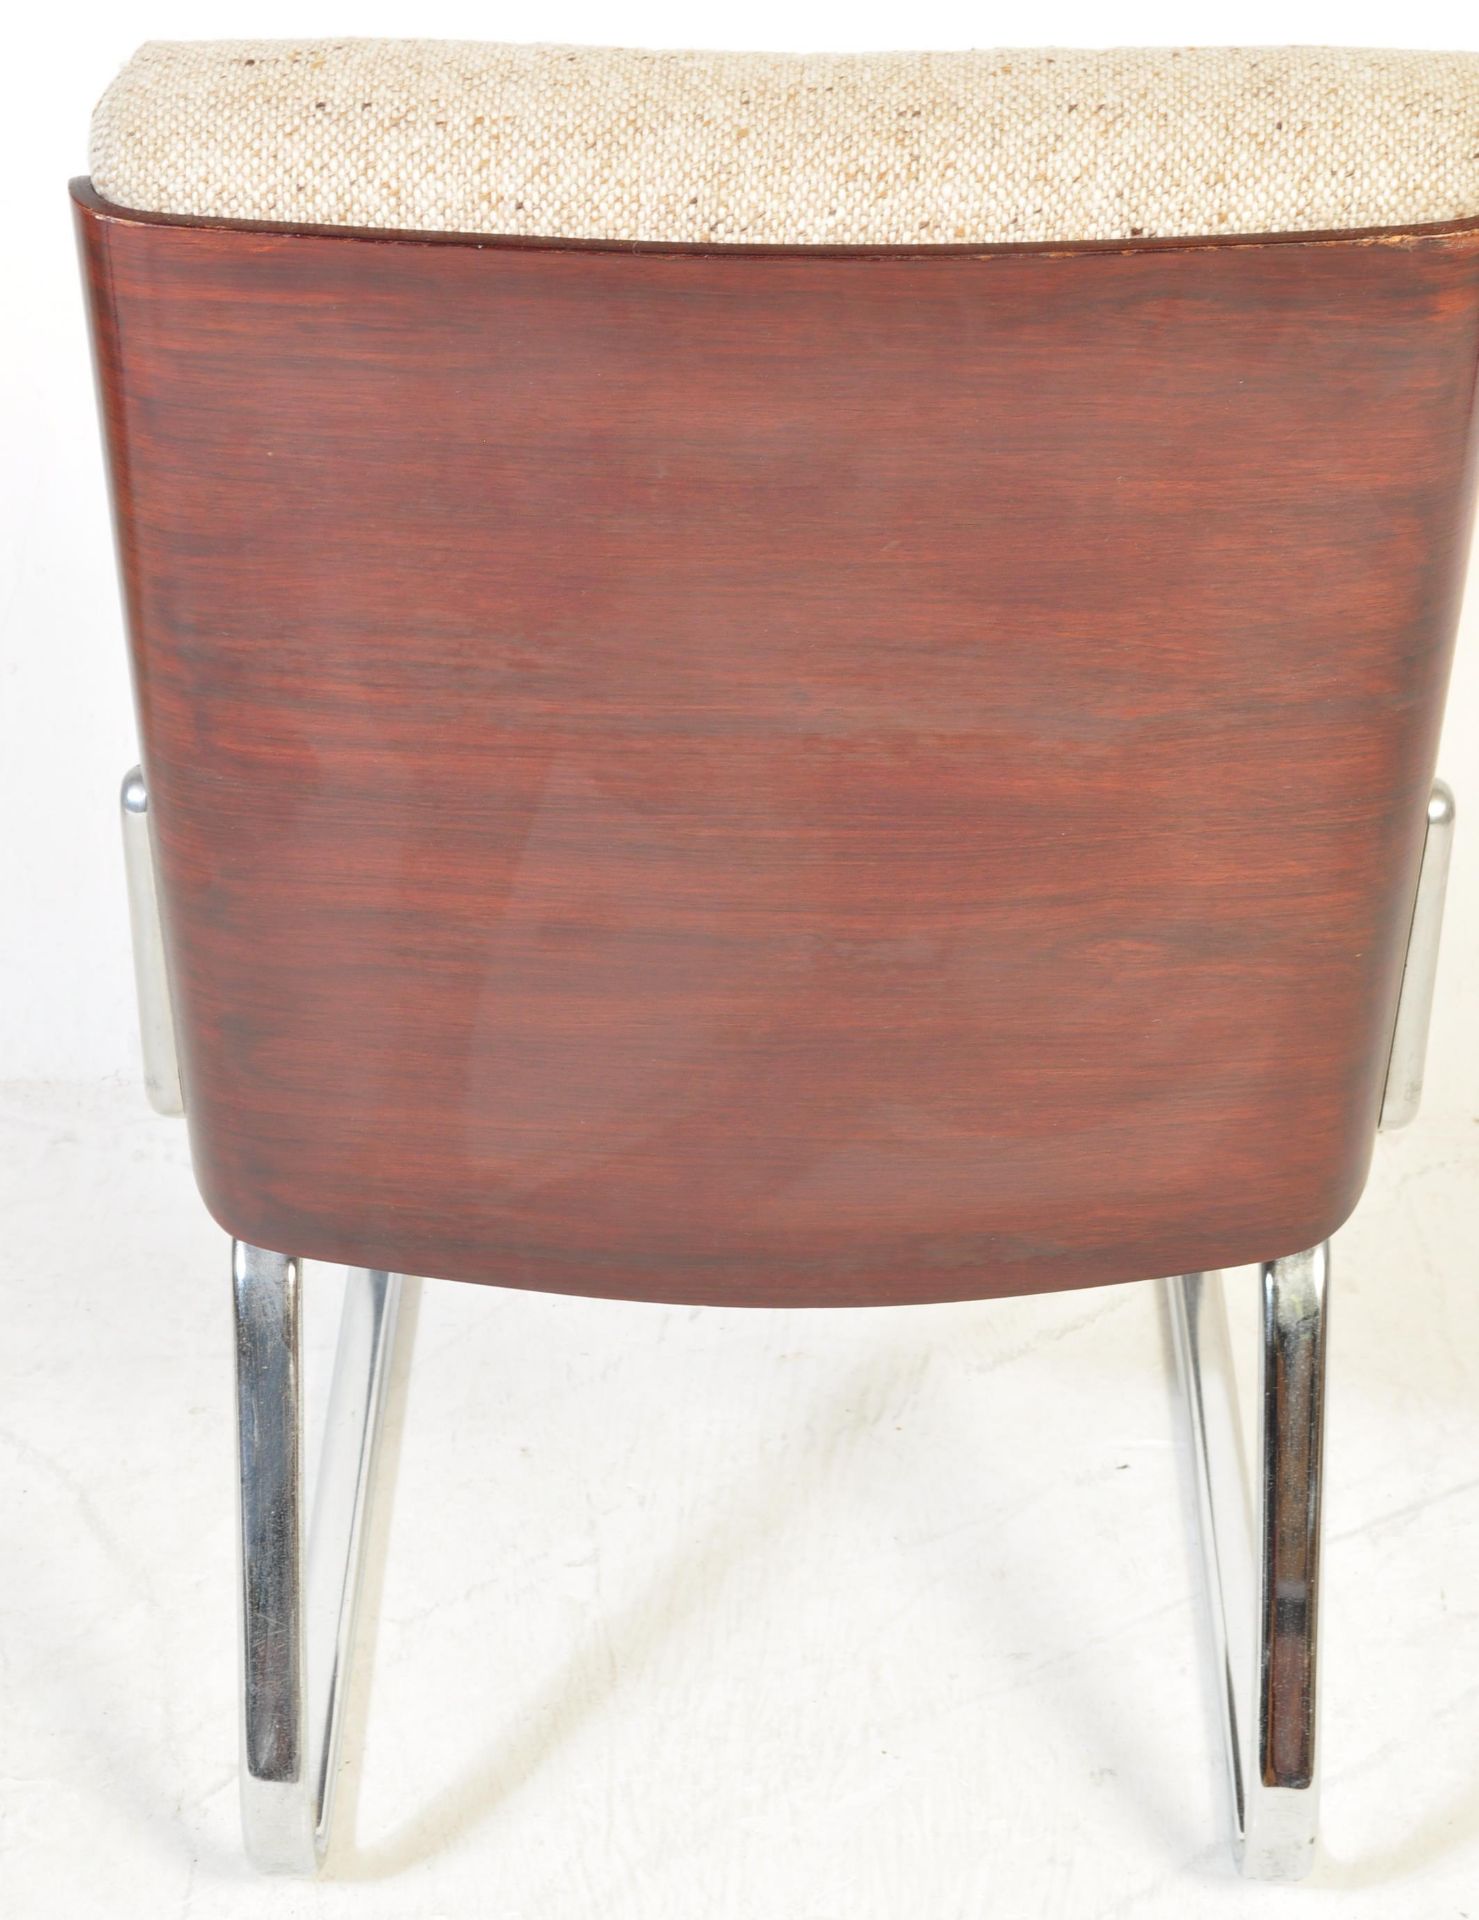 ORIGINAL VINTAGE GORDON RUSSELL OFFICE CHAIR - Image 6 of 7